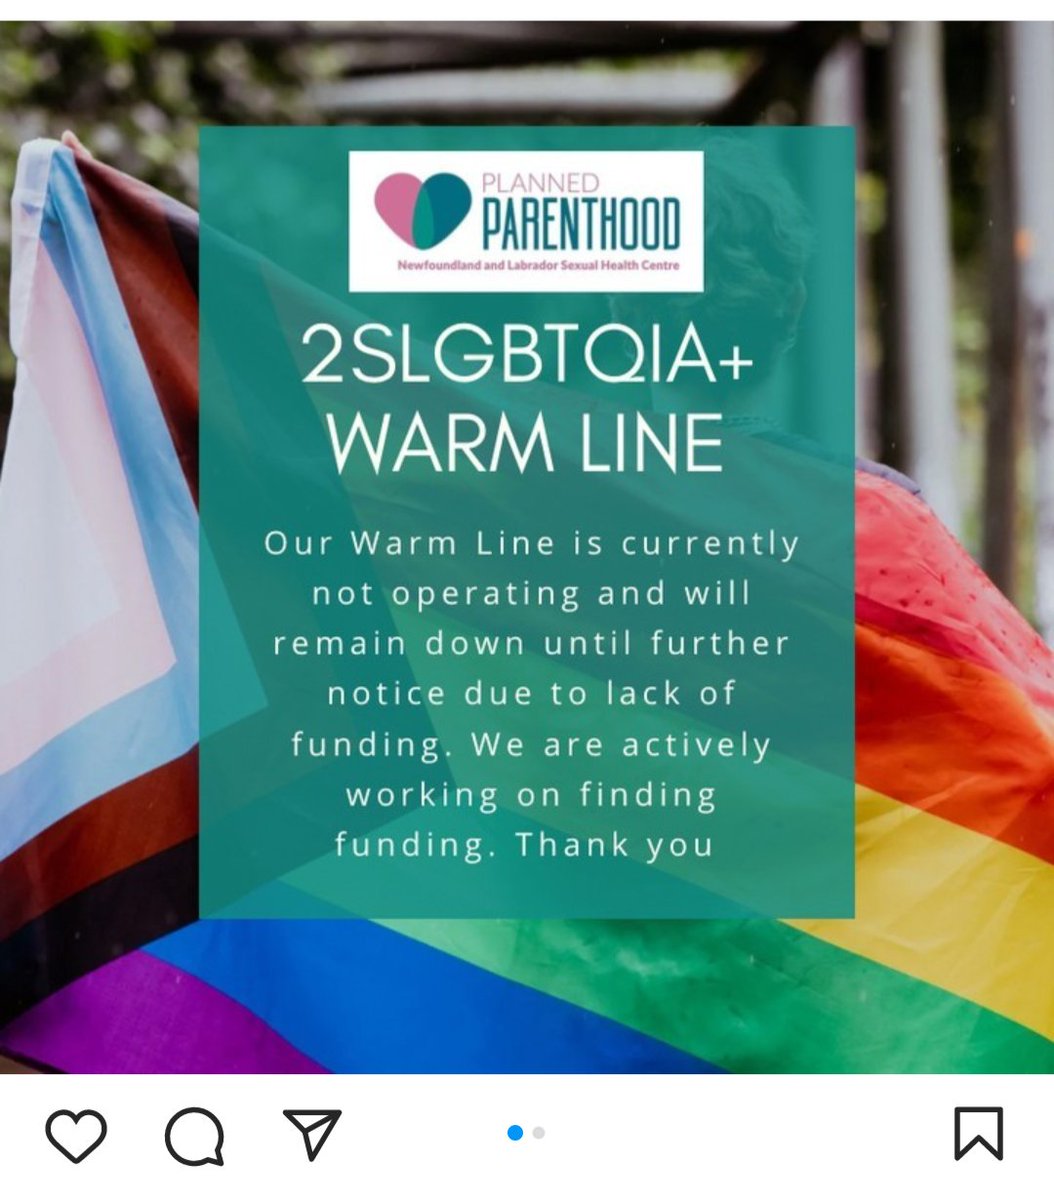 This news is really troubling. Politicians showed up at the counter protest on Friday for the cameras. Meanwhile, no funding for the 2SLGBTQIA+ warm line. Painful, especially right now. Let's turn it around!